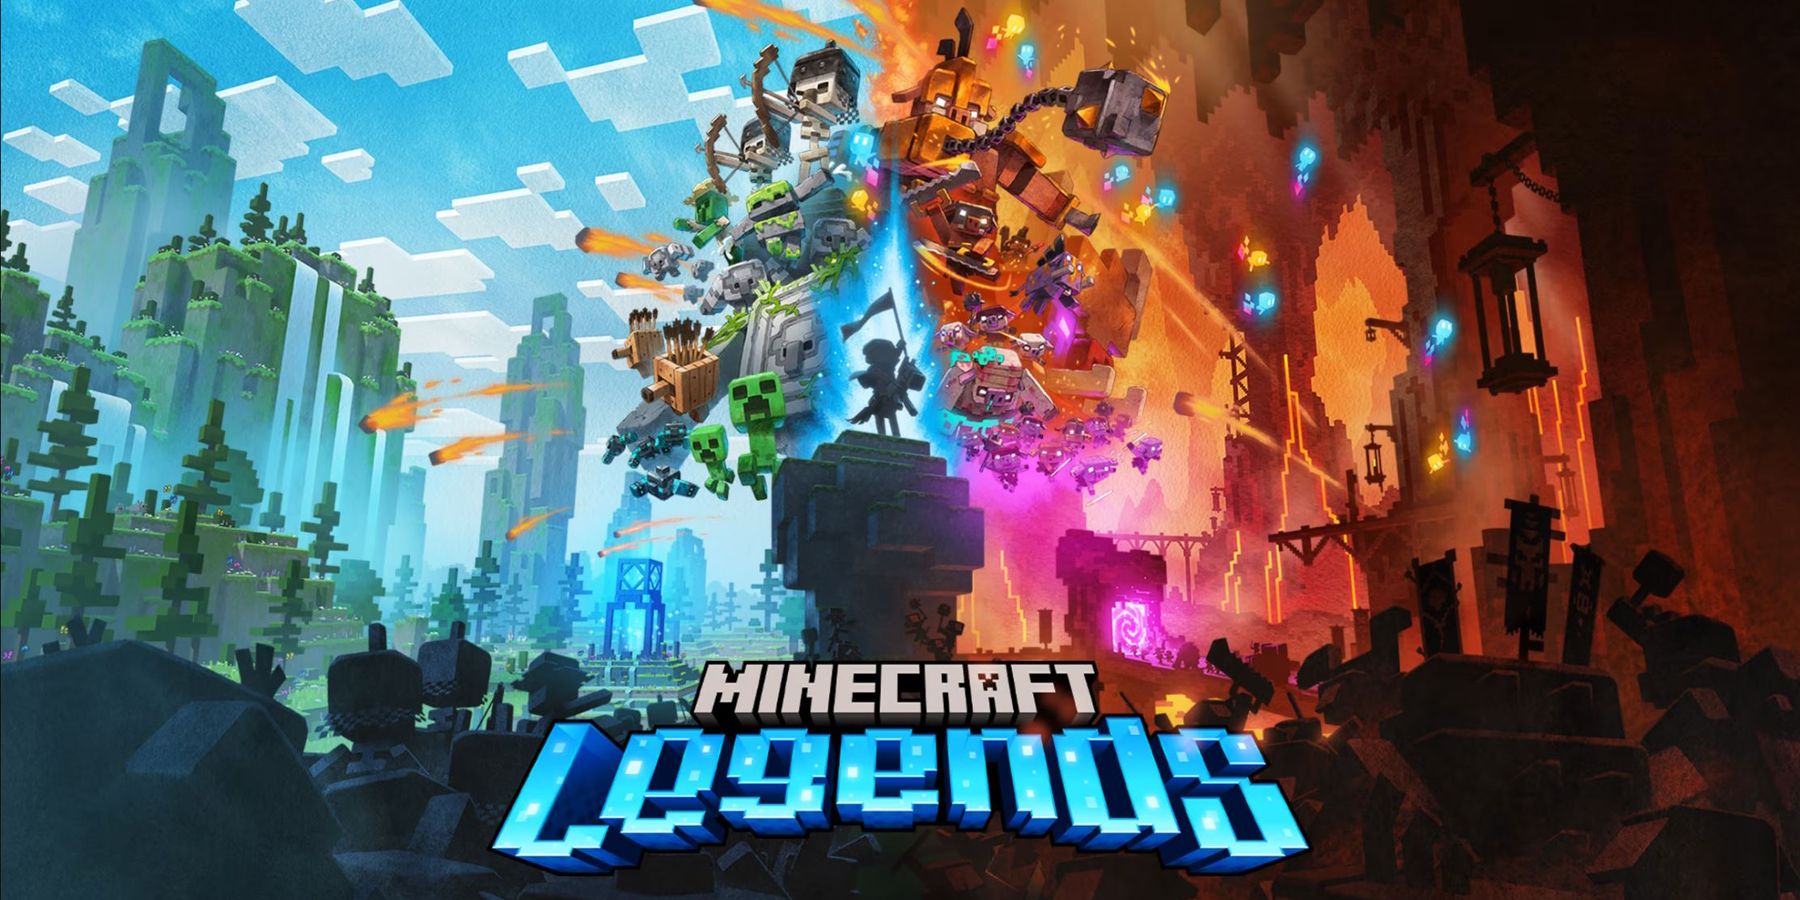 Minecraft Legends Cover Art showing the good guys on the left and the bad guys on the right with the logo in the middle